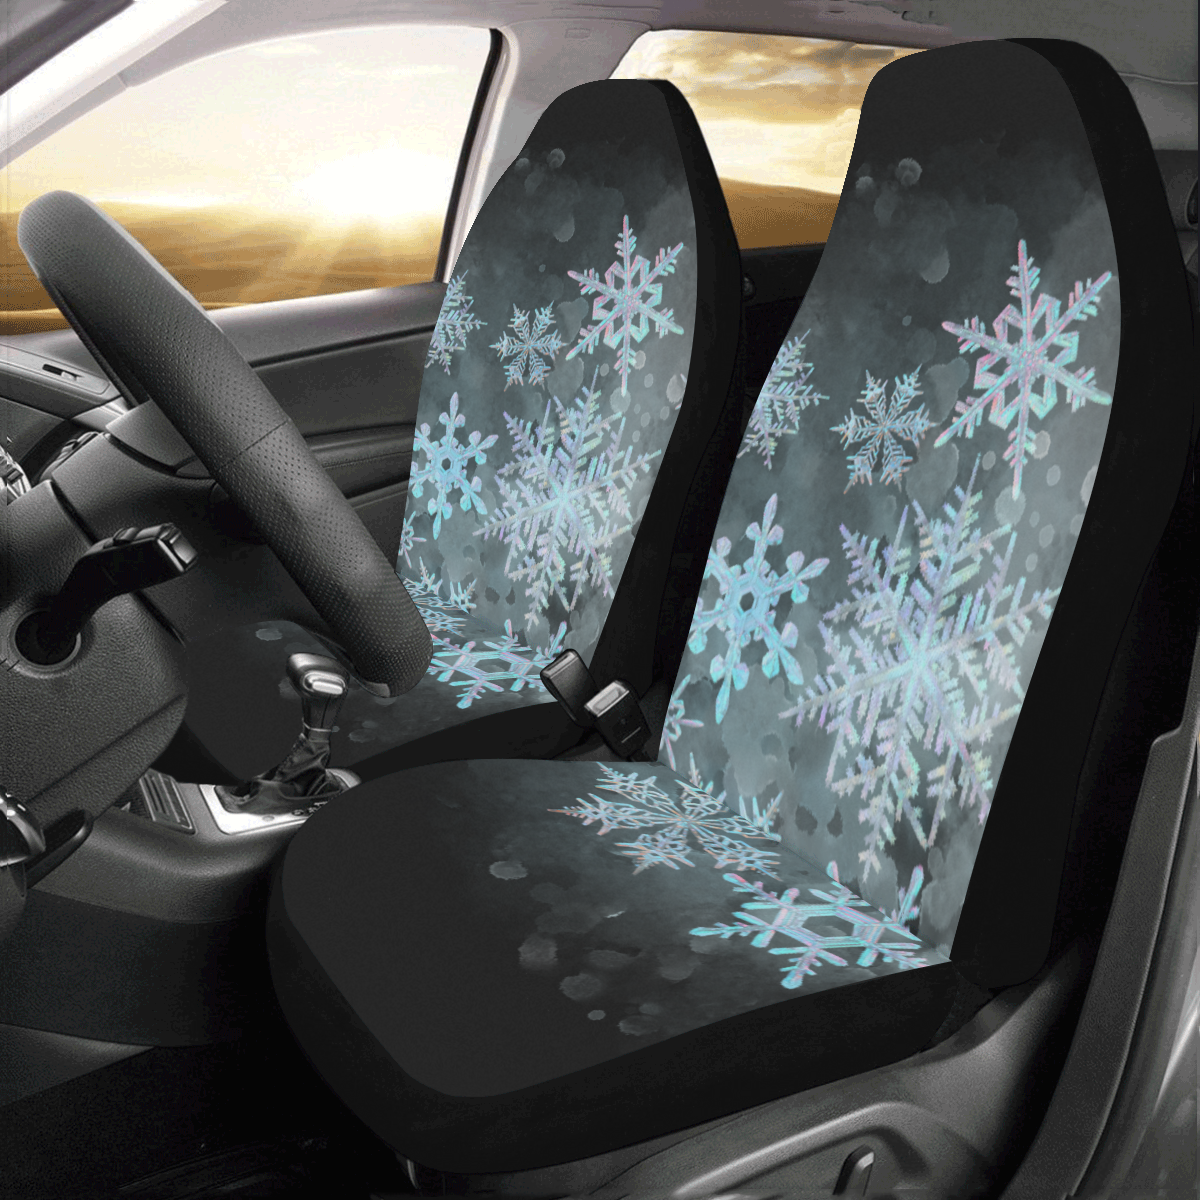 Snowflakes, snow, white and blue, Christmas Car Seat Covers (Set of 2)